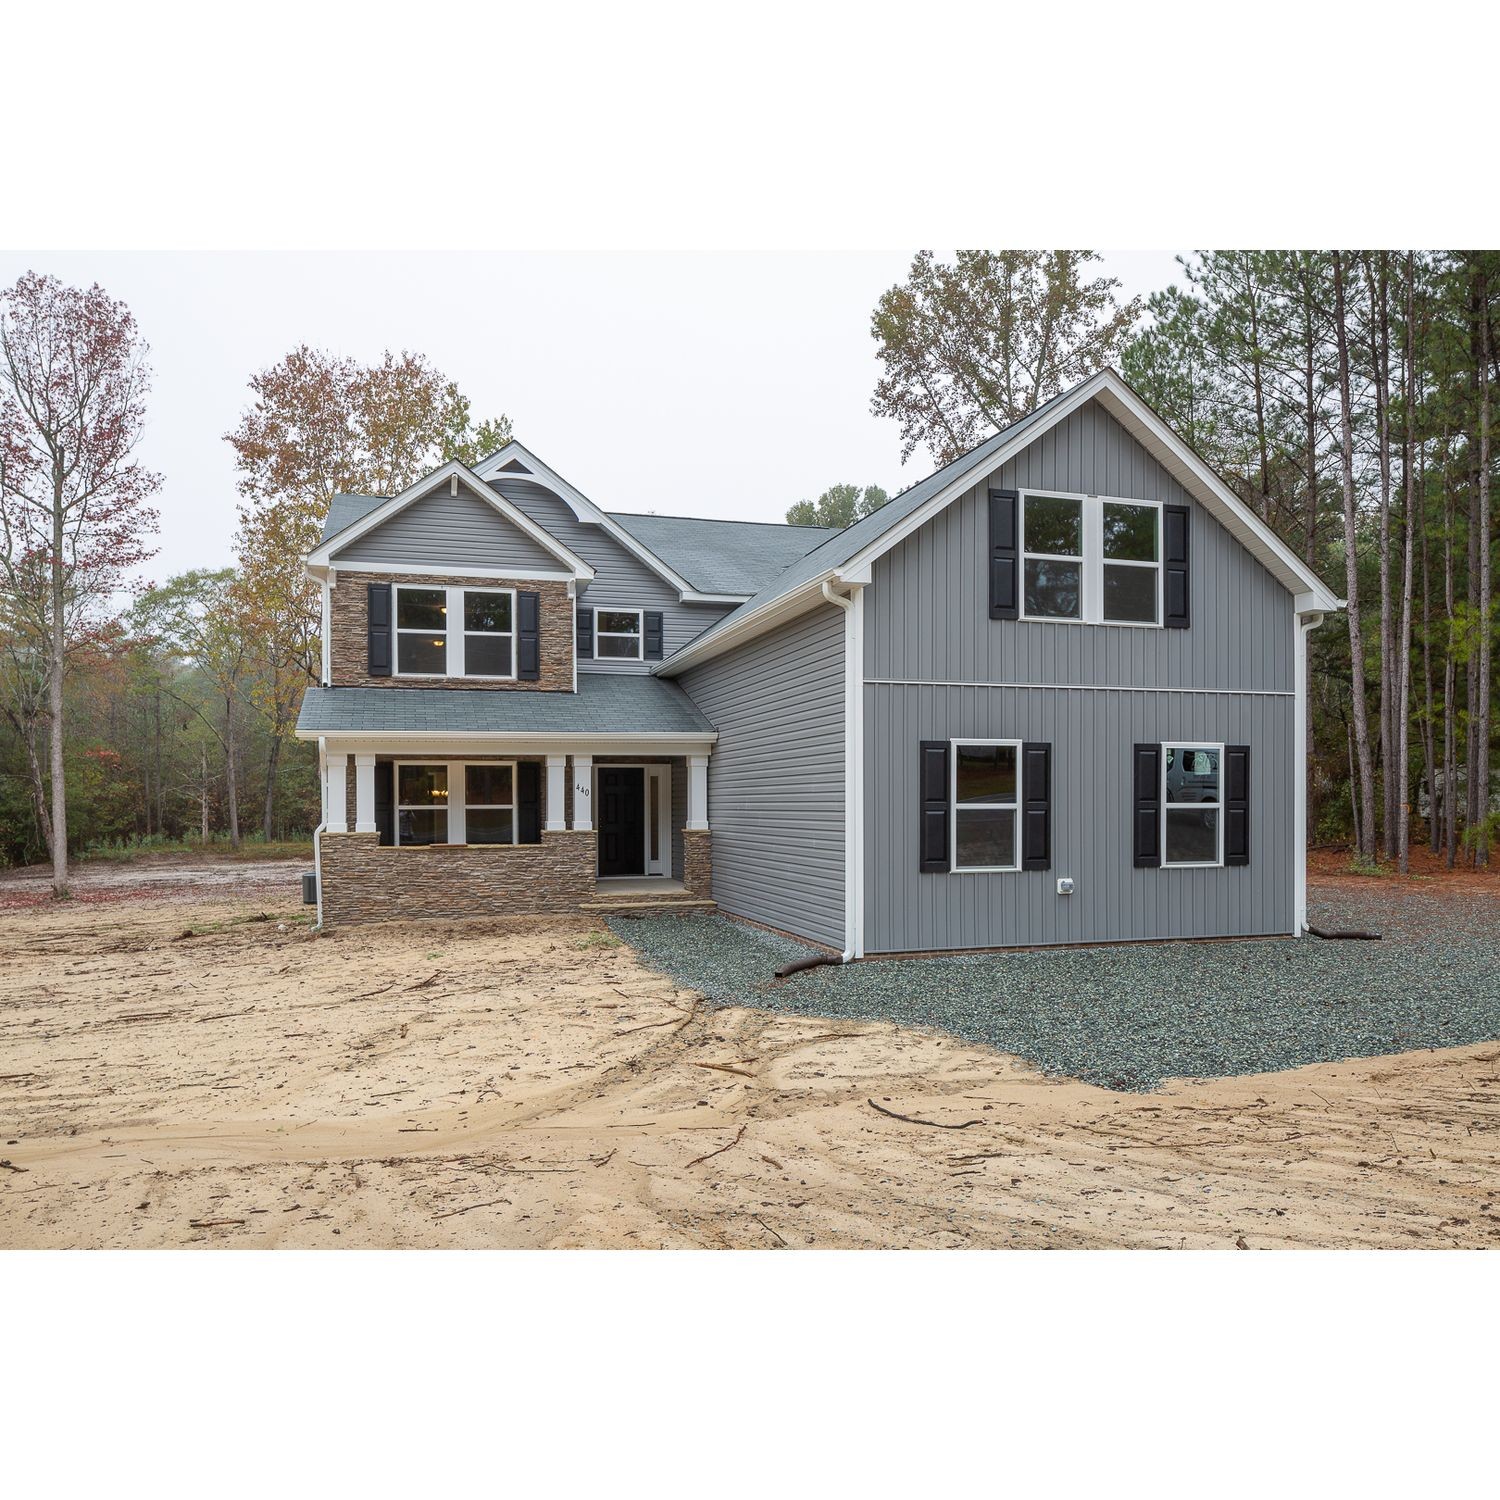 5. Valuebuild Homes - Rocky Mount - Build On Your Lot